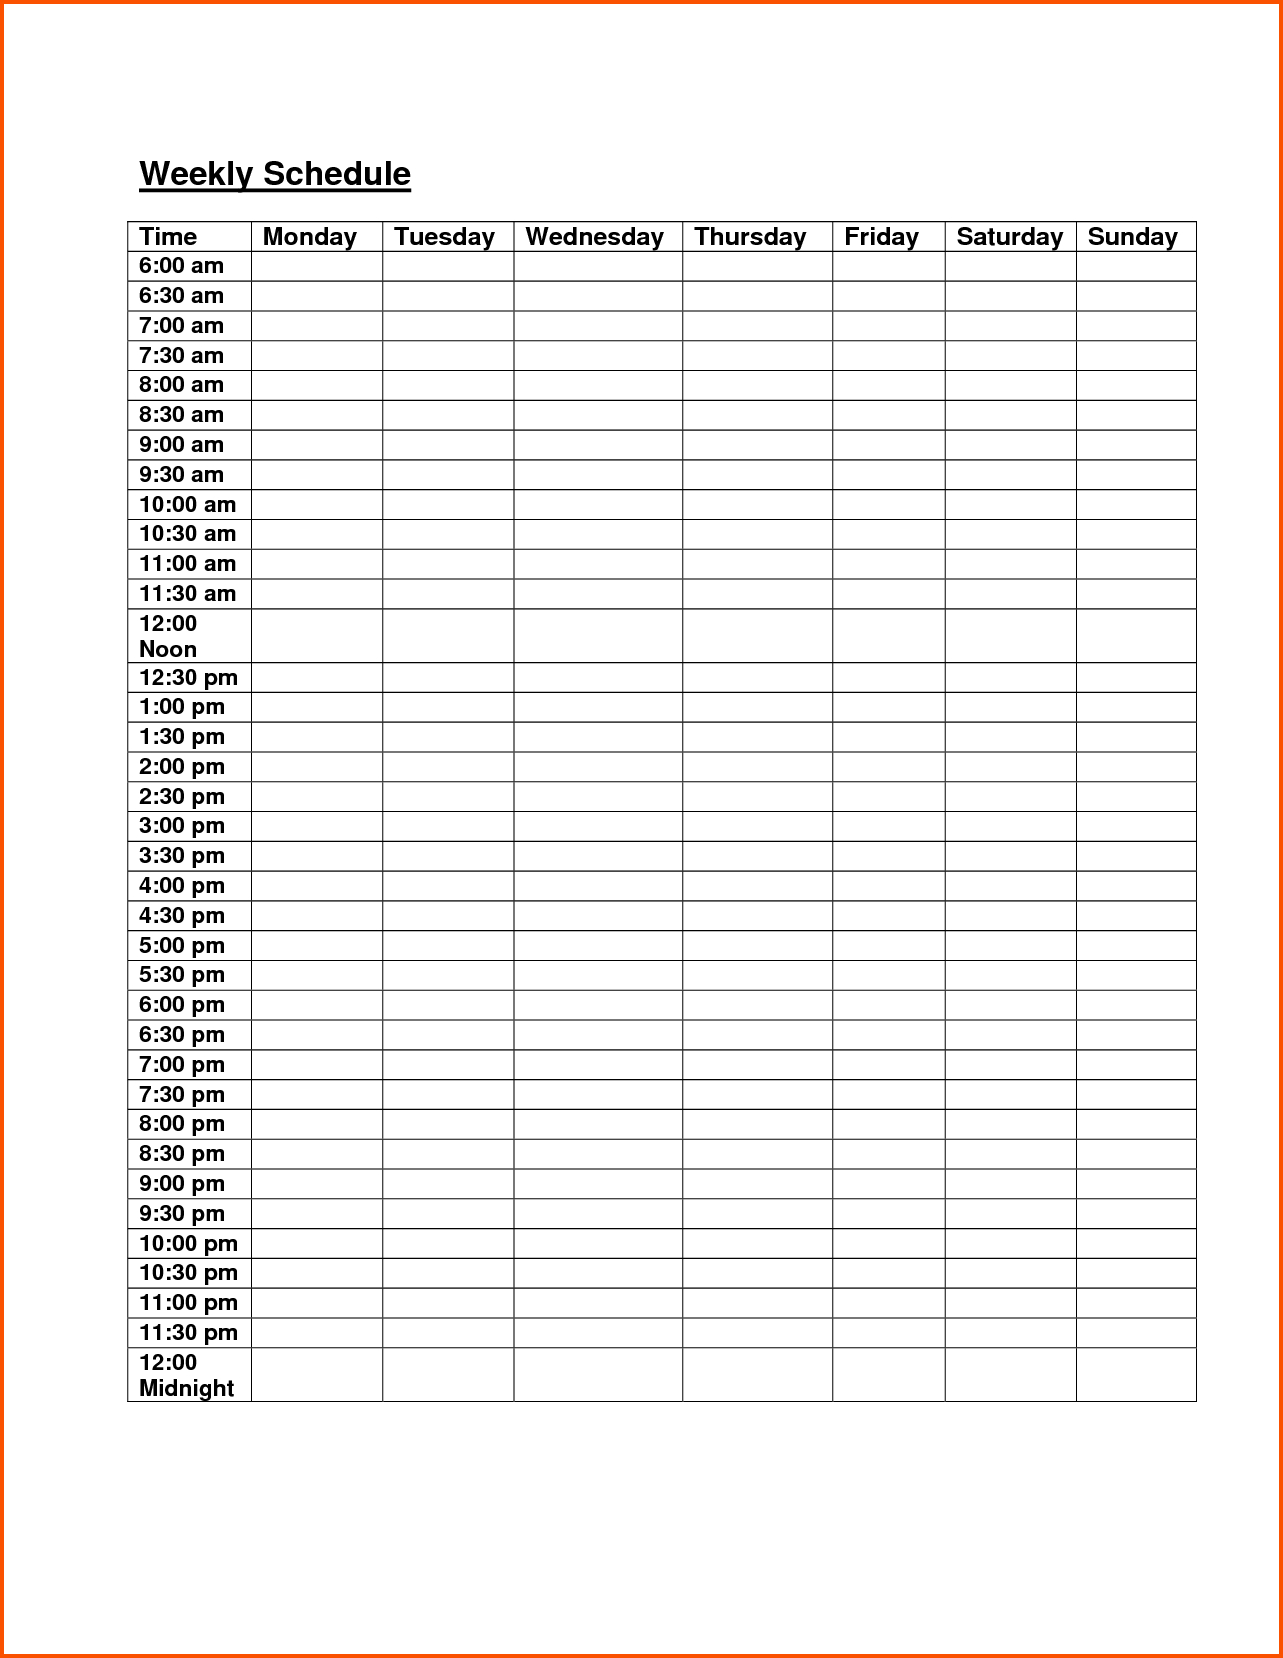 Free Weekly Class Schedule Template Excel #1 | Weekly intended for Free Weekly Schedule